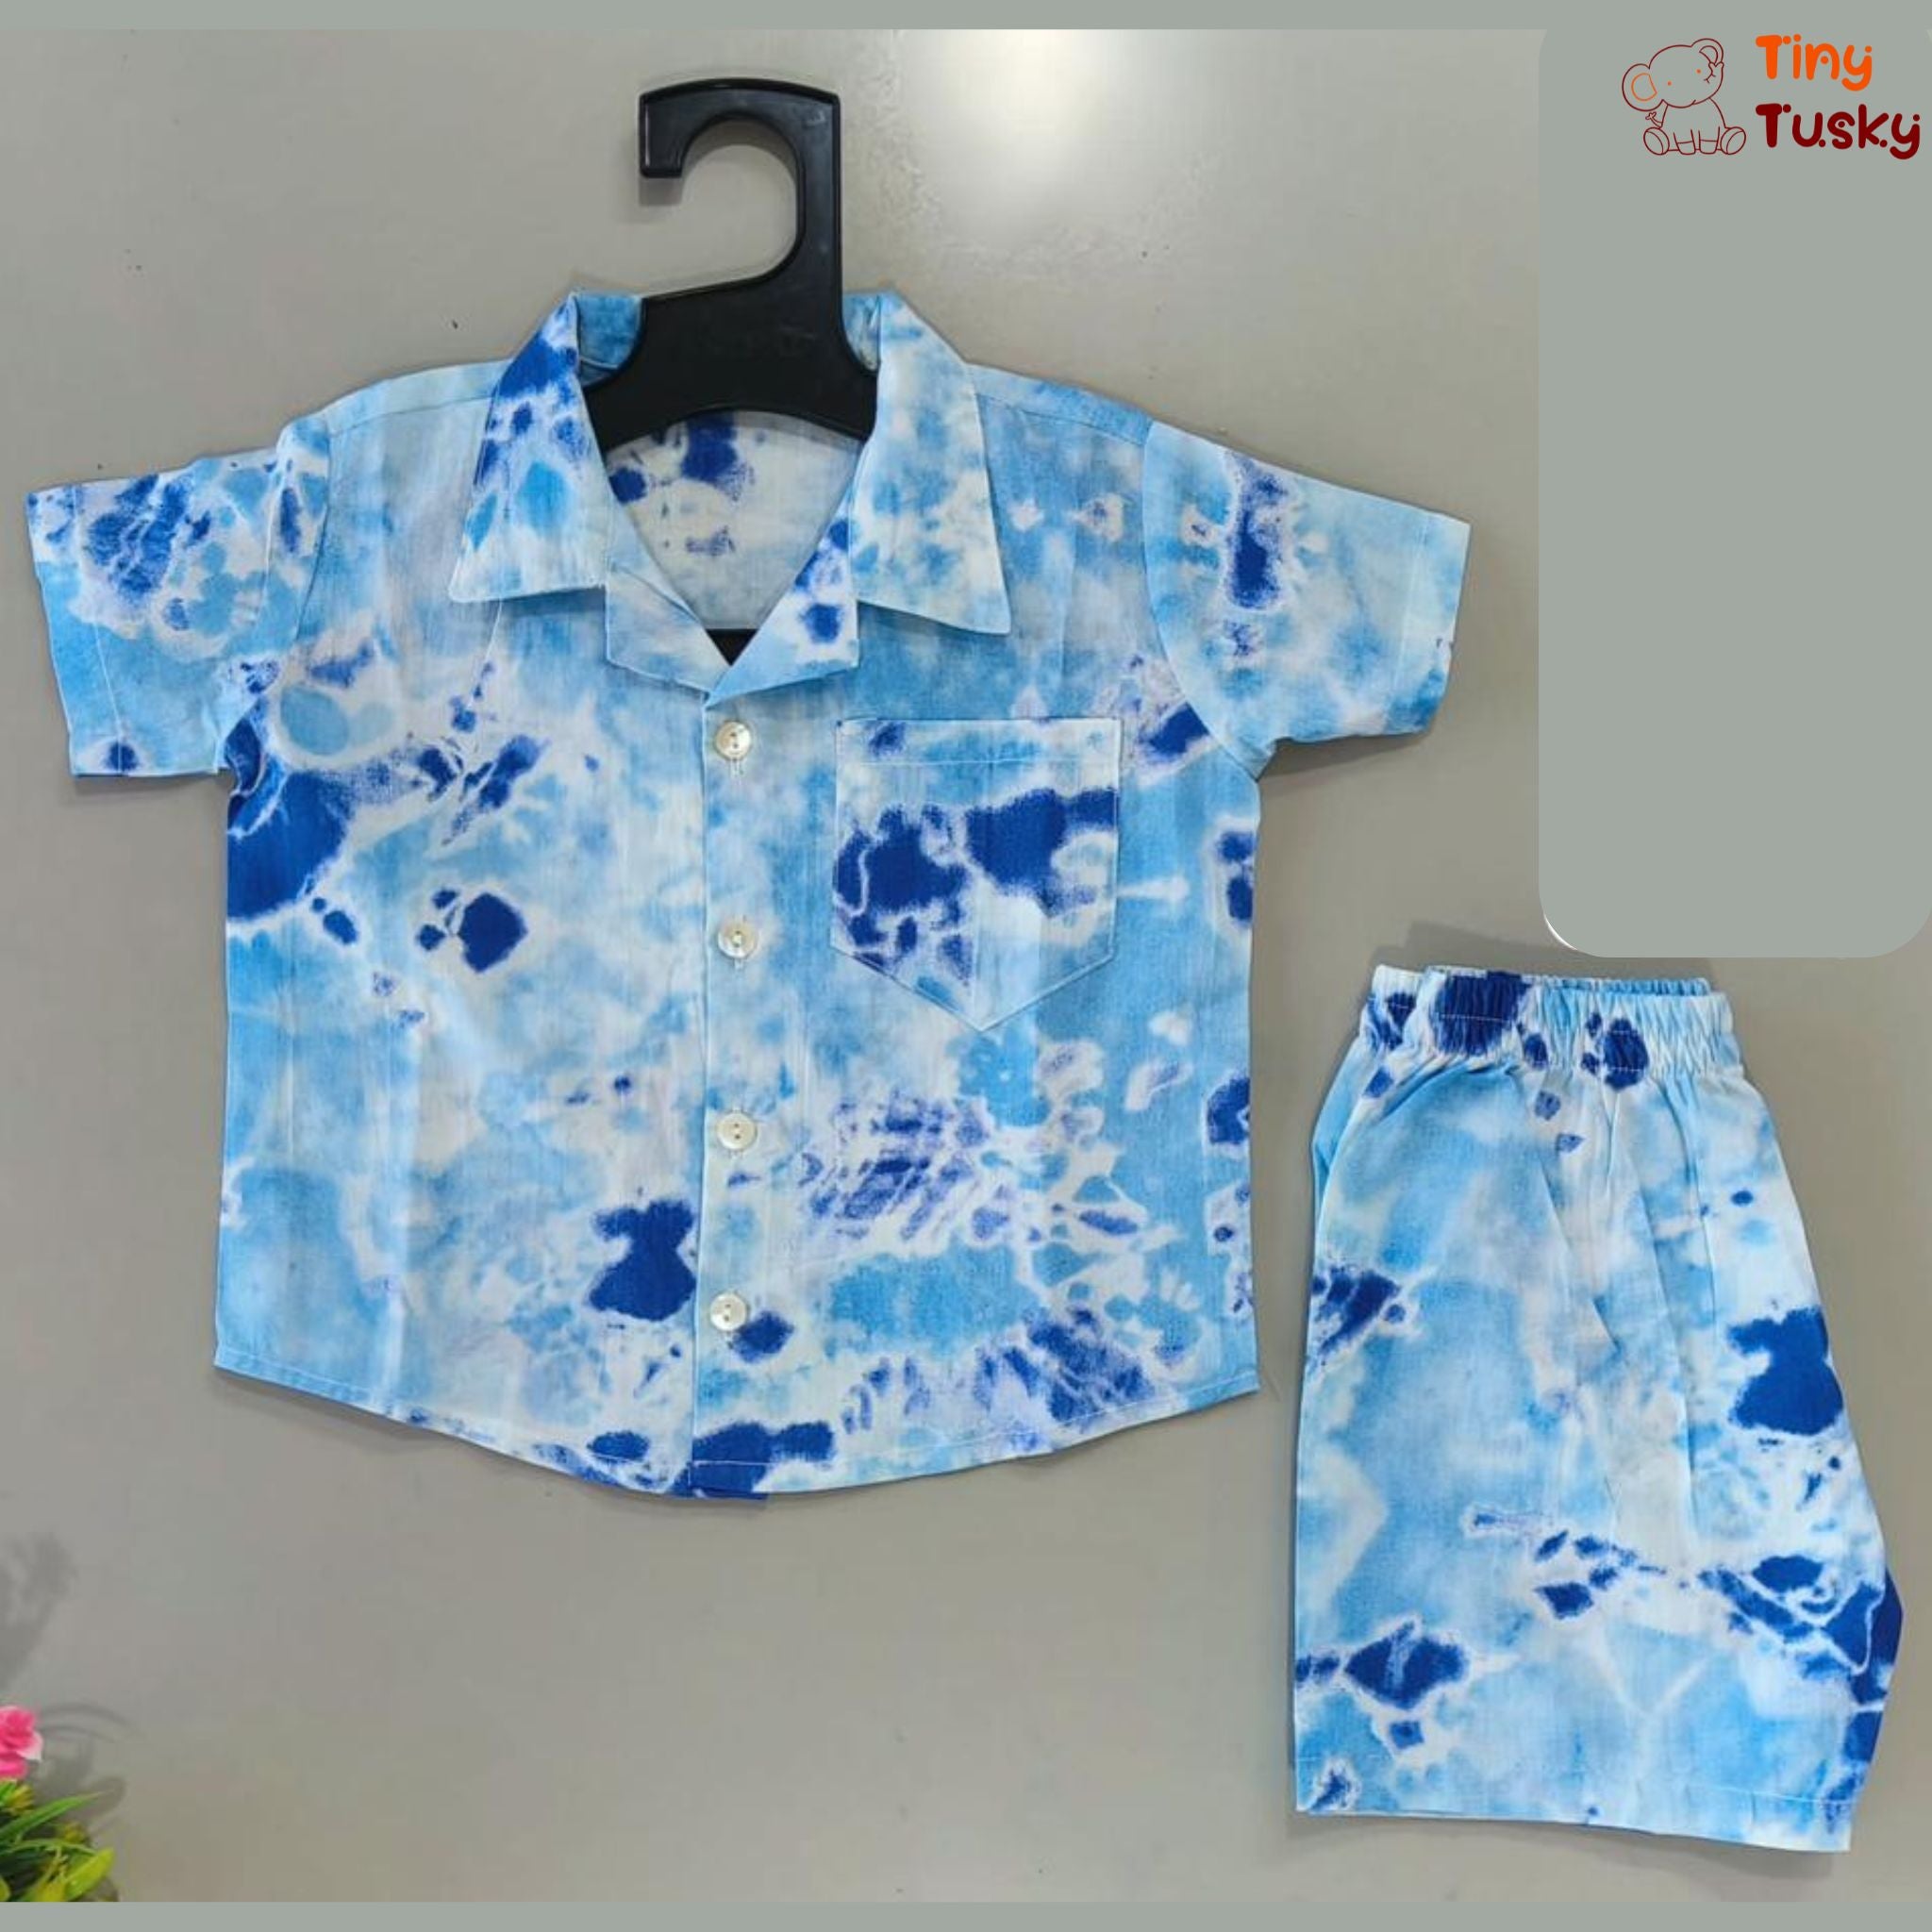 Catch some summer waves in style with the Tiny Tusky Kids' Beach Vibes Tie-Dye Co-Ord Set! This playful set is perfect for all your little adventurer's summer fun, from splashing at the beach to brunching in bohemian style.  Made from cool and comfortable 100% cotton, the tie-dye print in a vibrant blue color adds a touch of beachy flair to any occasion. The relaxed-fit shirt and shorts allow for easy movement and carefree fun, making it the perfect outfit for a day of summer adventures.